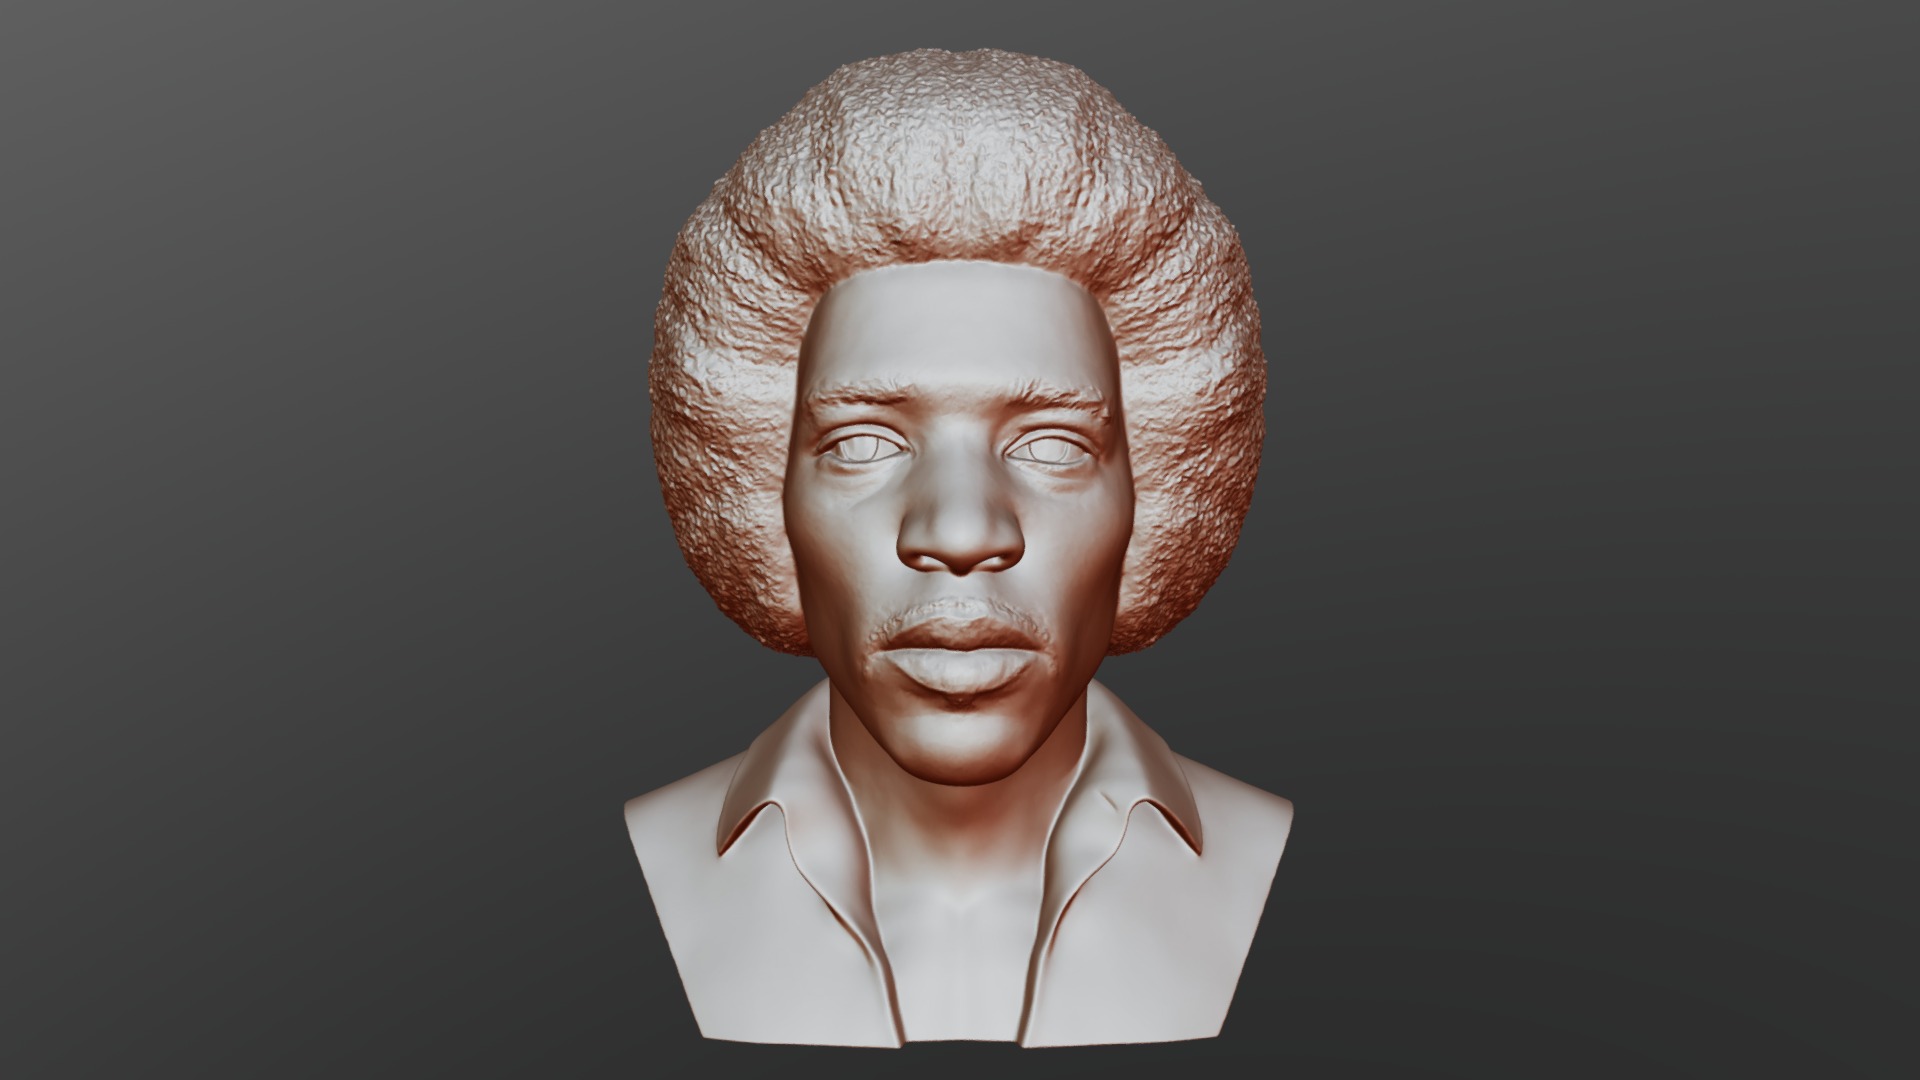 3D model Jimmi Hendrix bust for 3D printing - This is a 3D model of the Jimmi Hendrix bust for 3D printing. The 3D model is about a man's head with a human face.